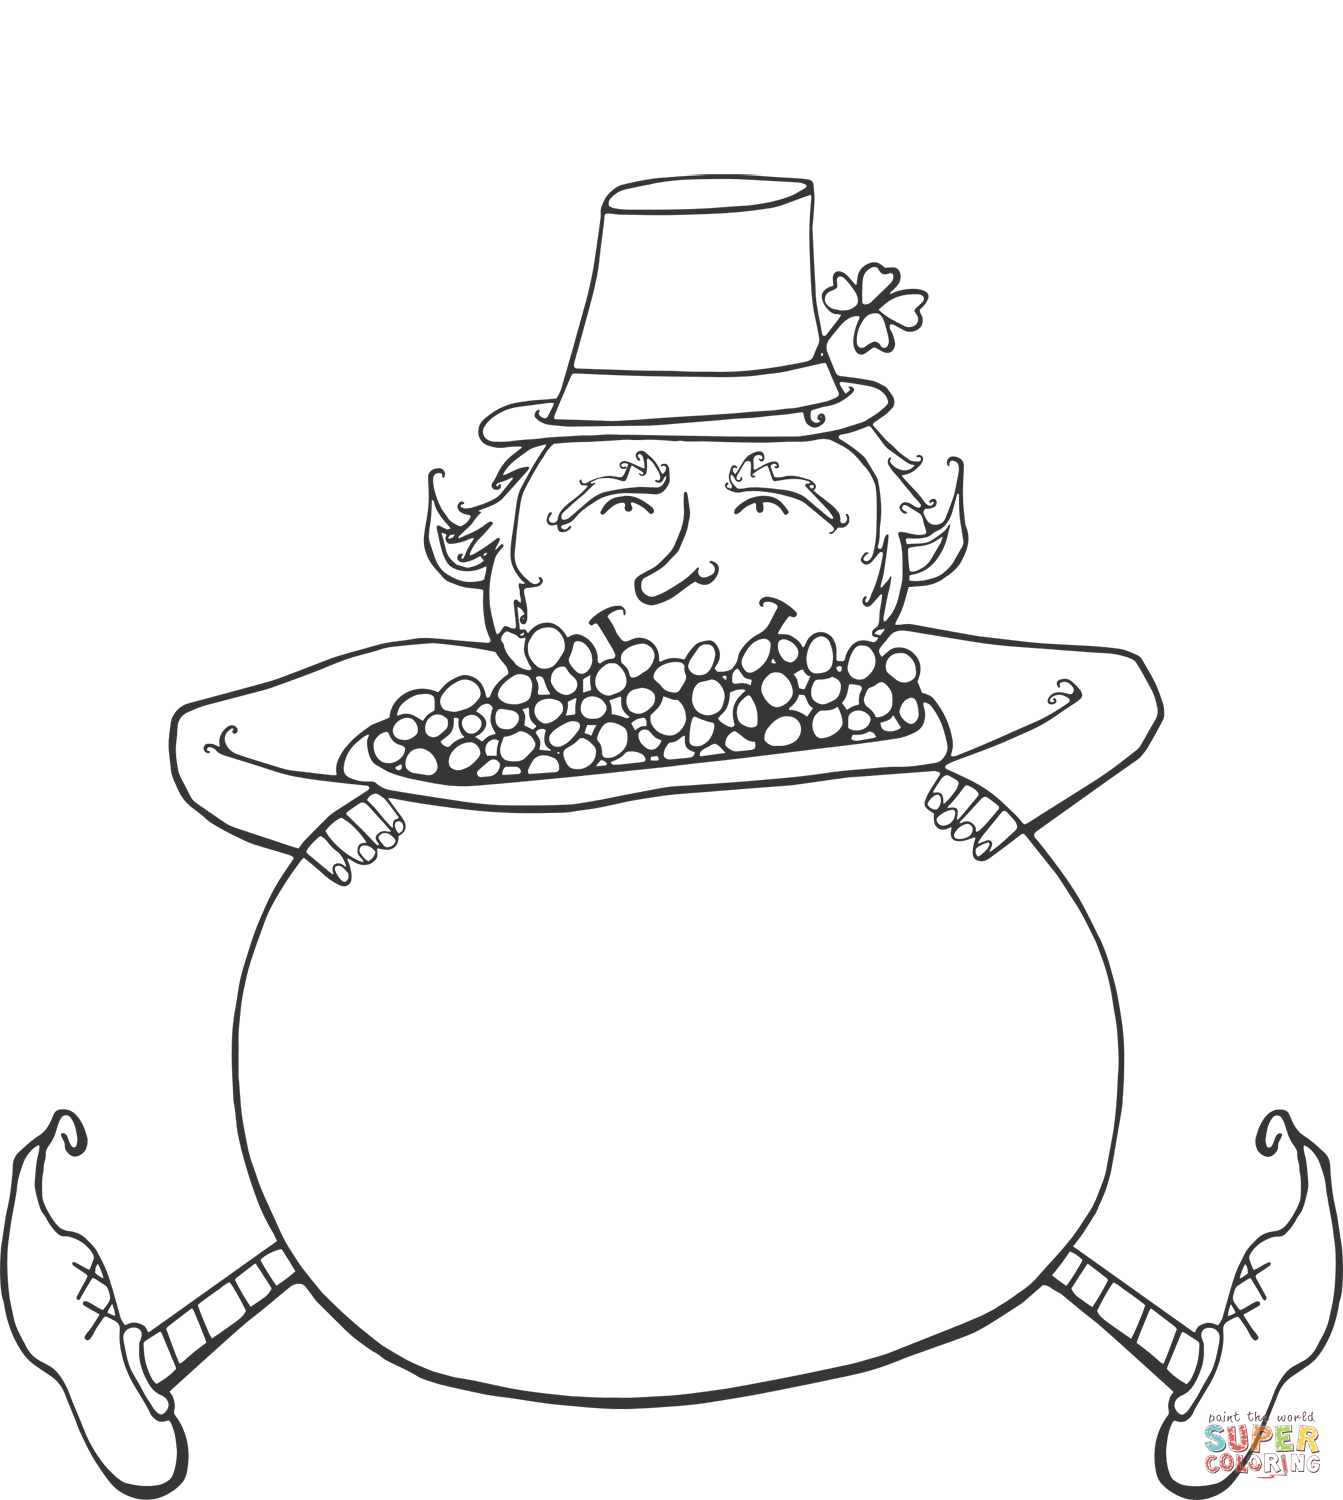 Leprechaun with pot of gold coloring page free printable coloring pages